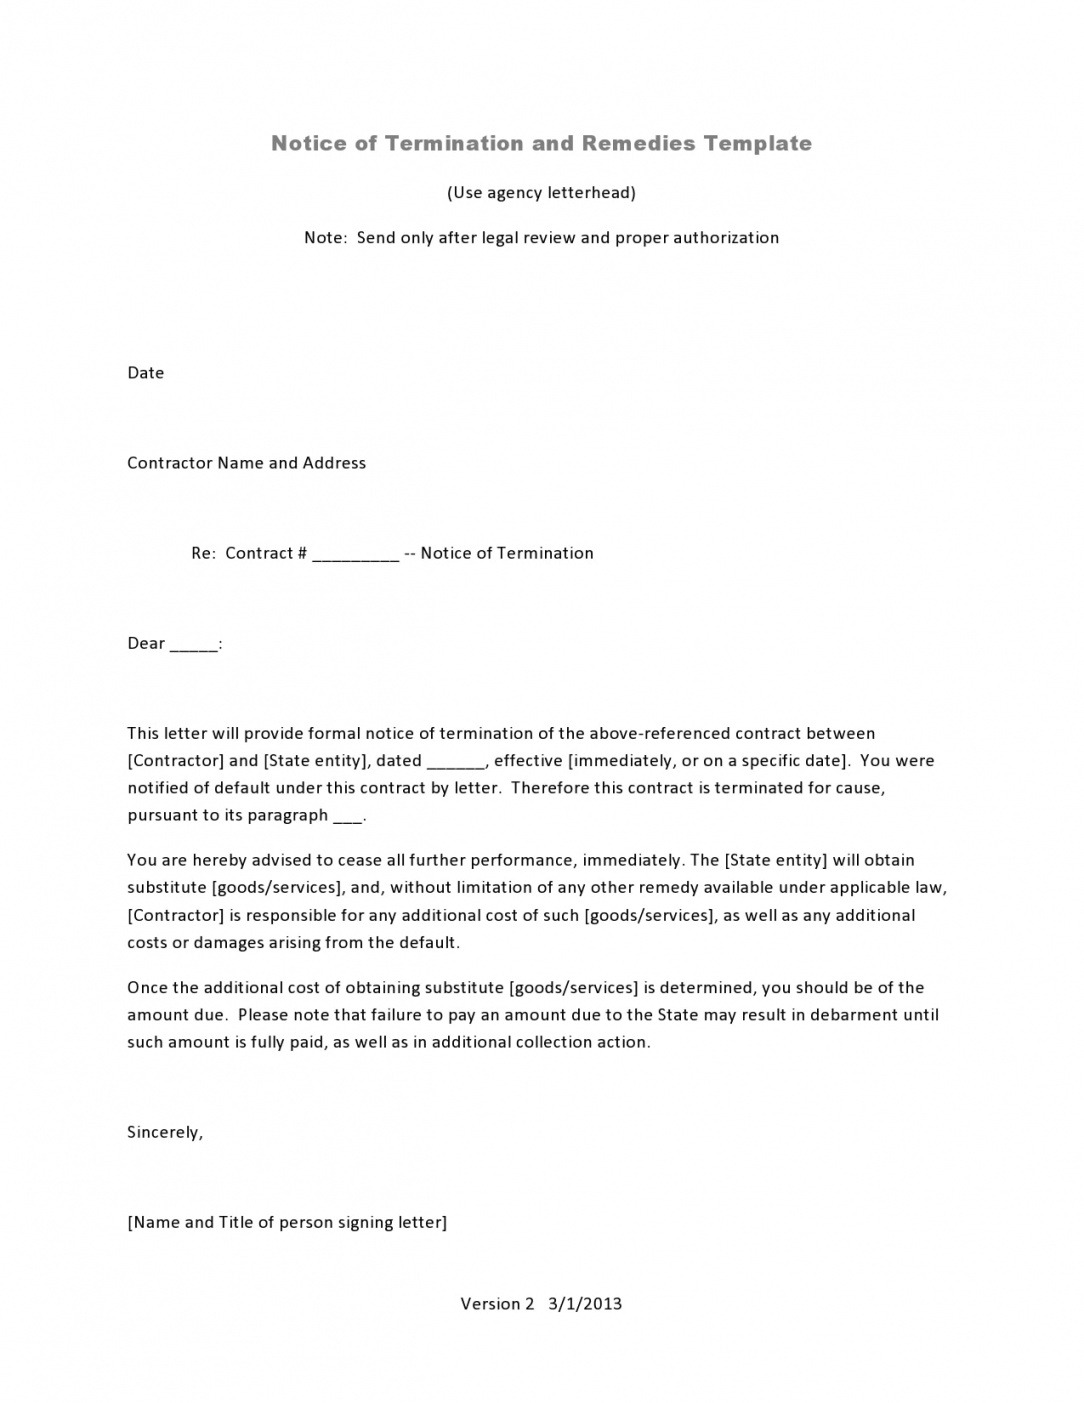 Costum Notice Of Termination Of Employment Template Word Sample